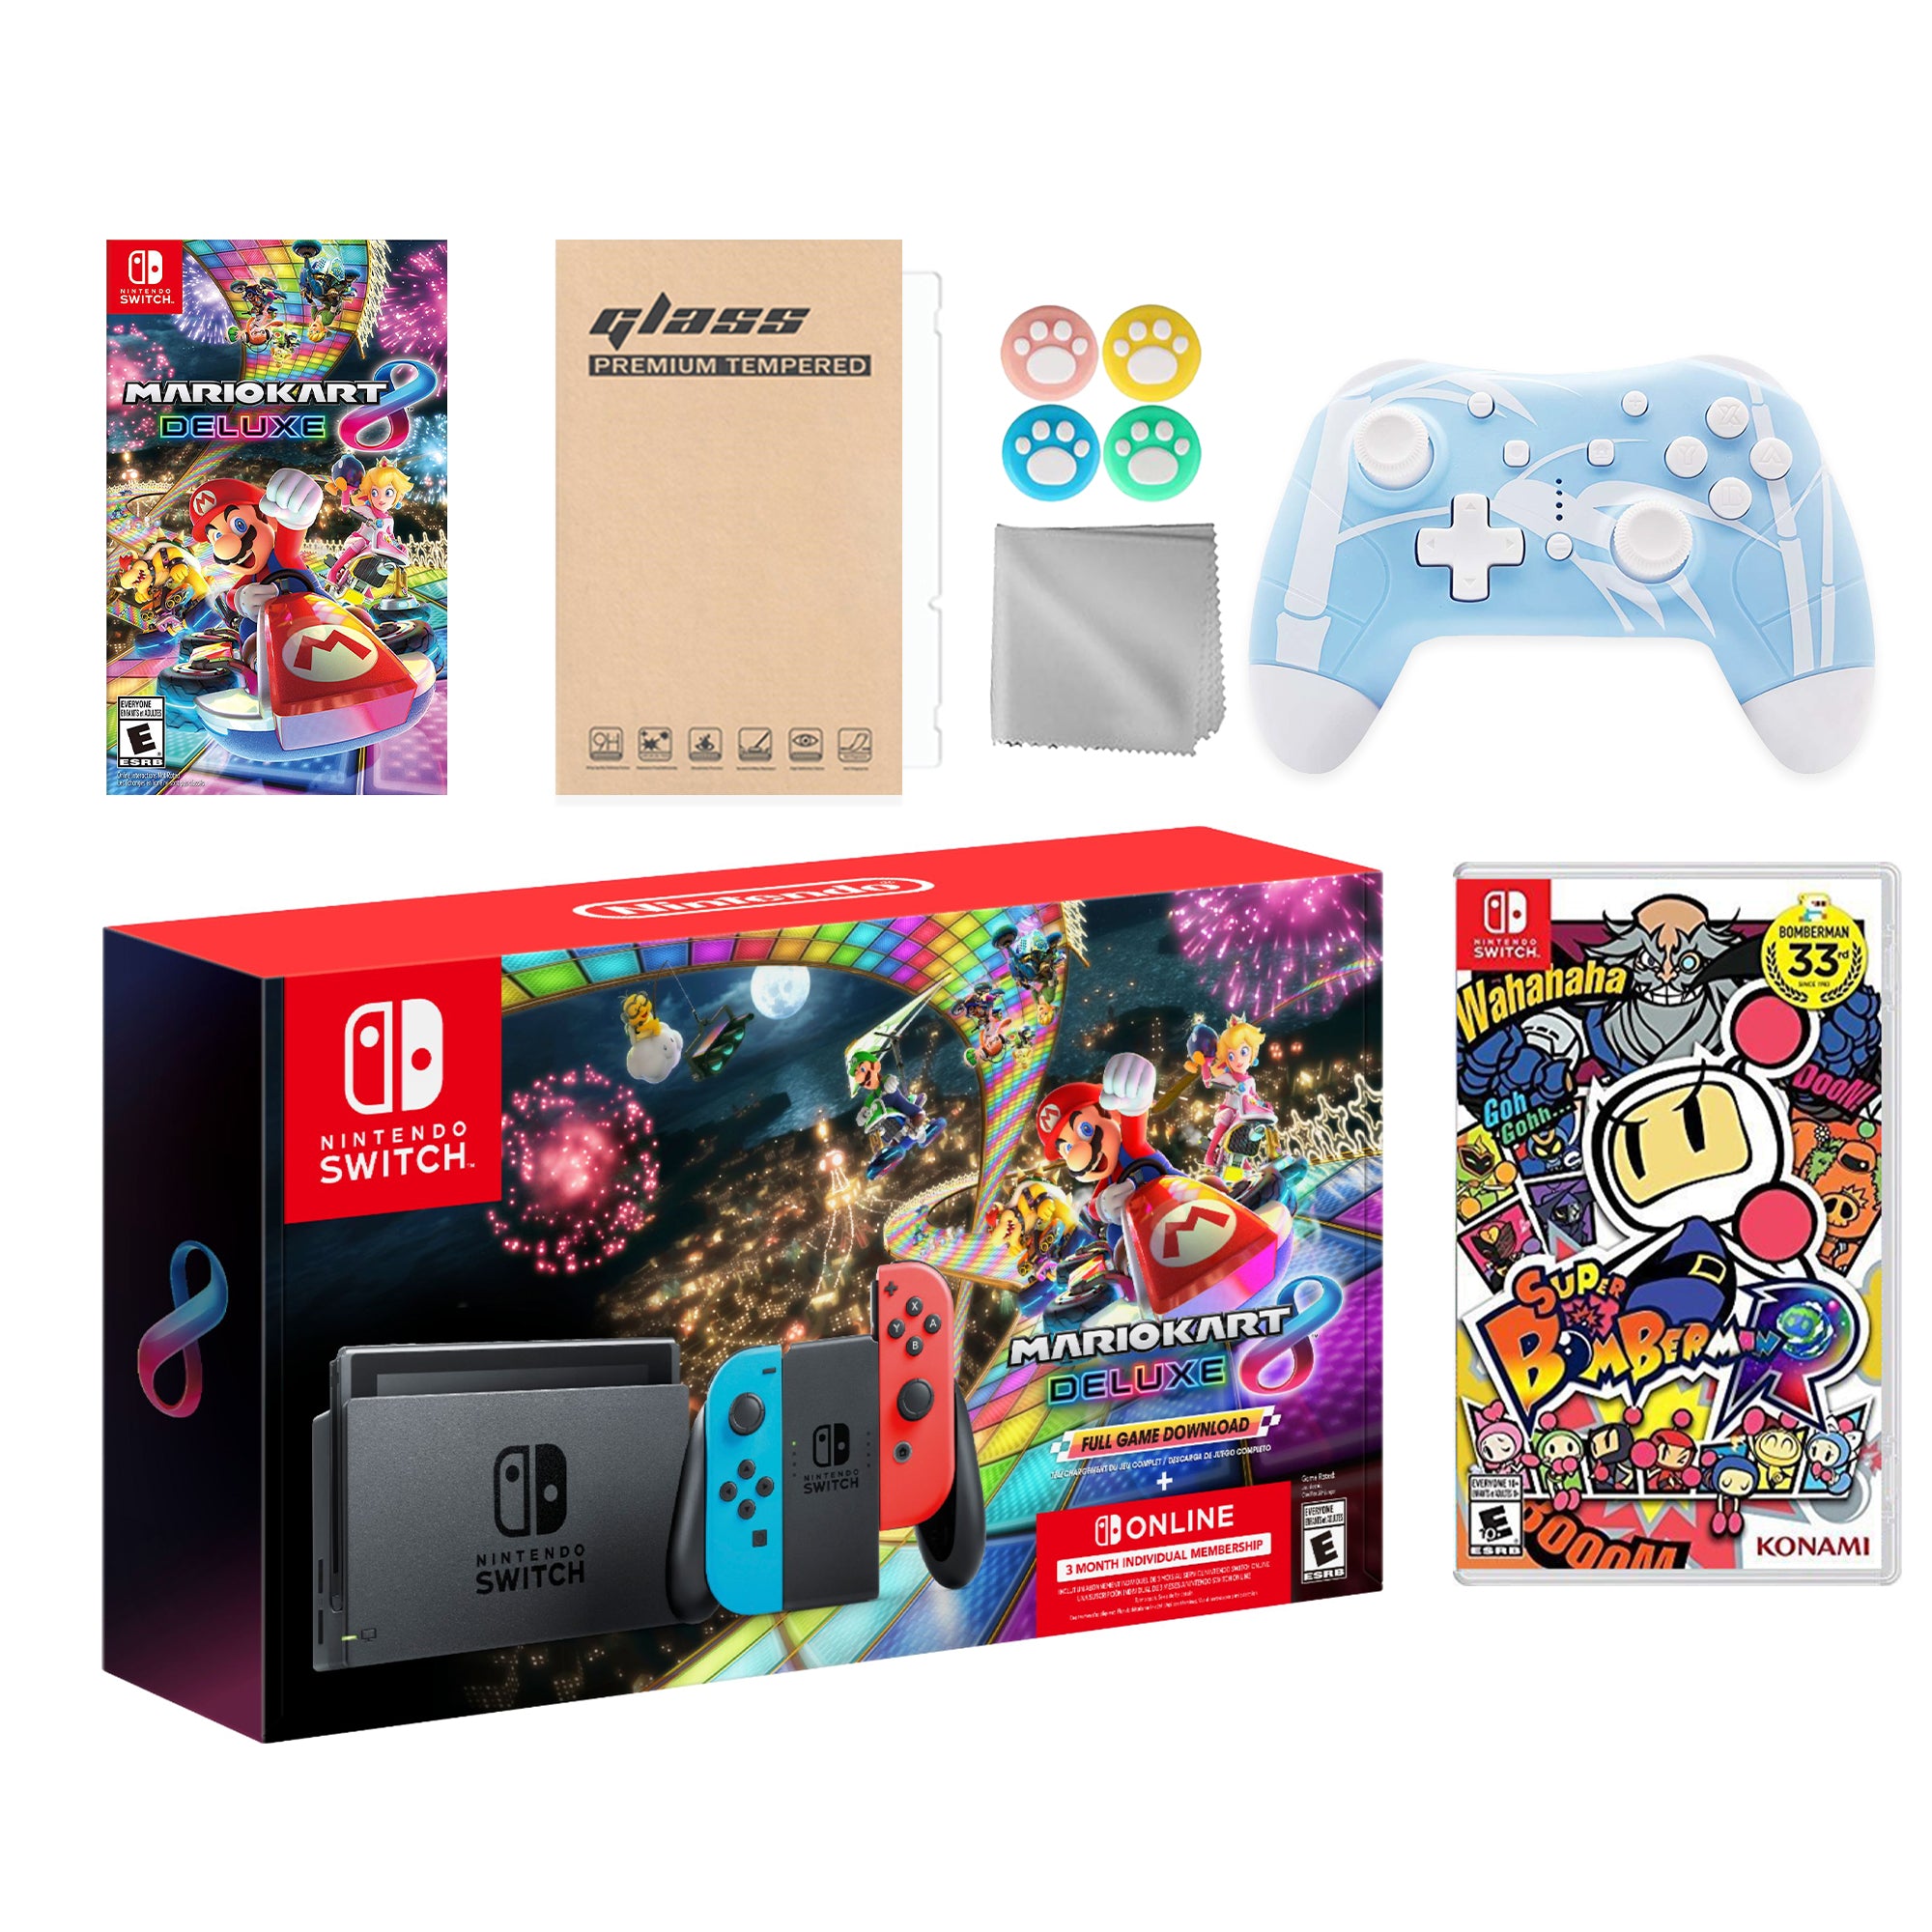 Nintendo Switch Mario Kart 8 Deluxe Bundle: Red Blue Console, Mario Kart 8 & Membership, Super Bomberman R, Mytrix Wireless Pro Controller Blue Bamboo and Accessories